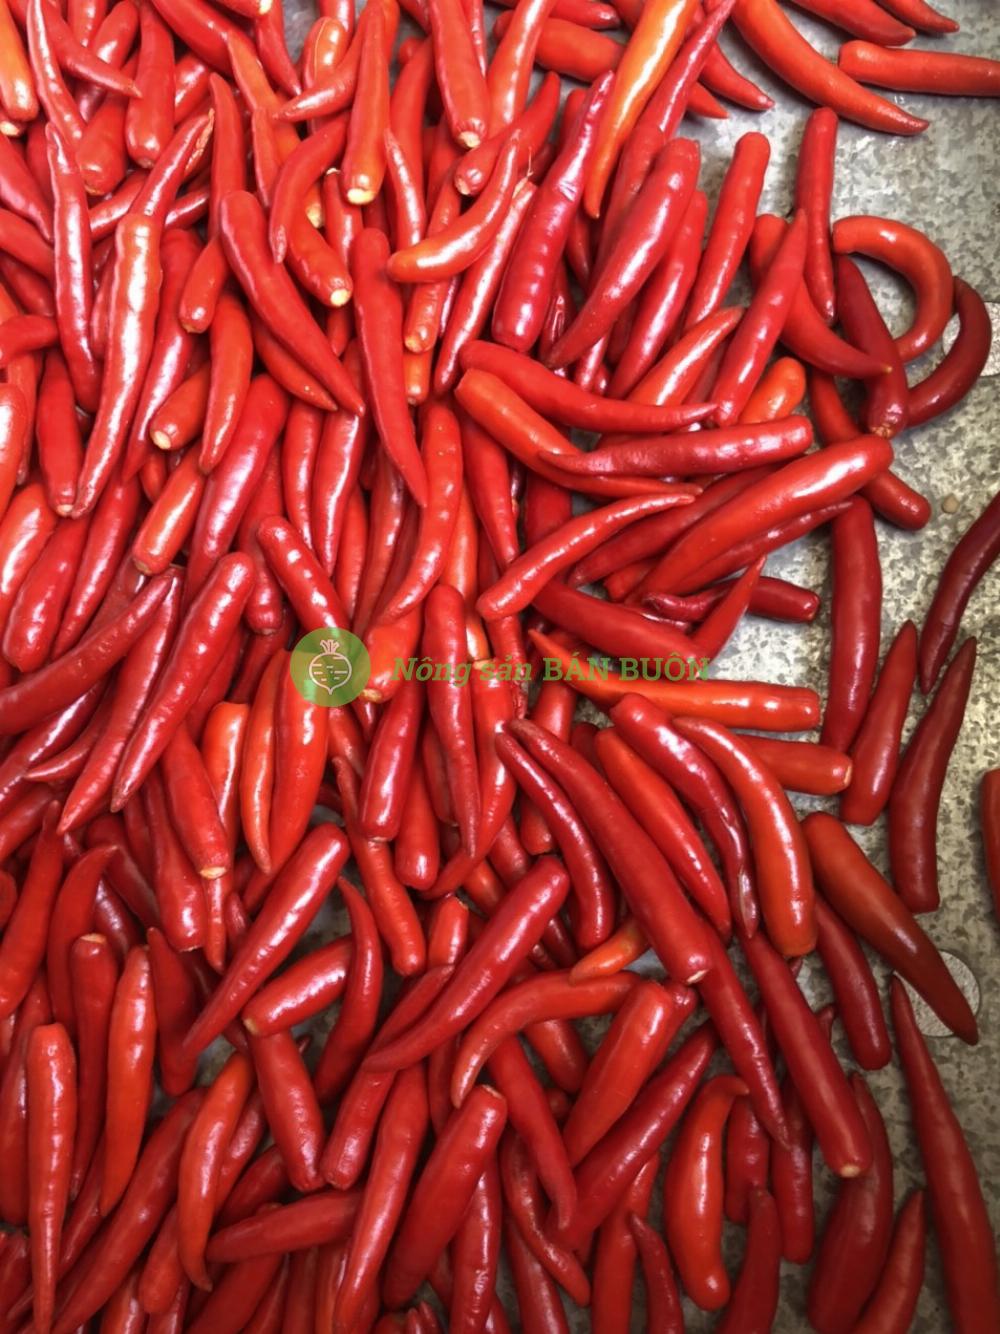 Frozen Hot Chilli Peppers for Export from Vietnam to Foreign Countries